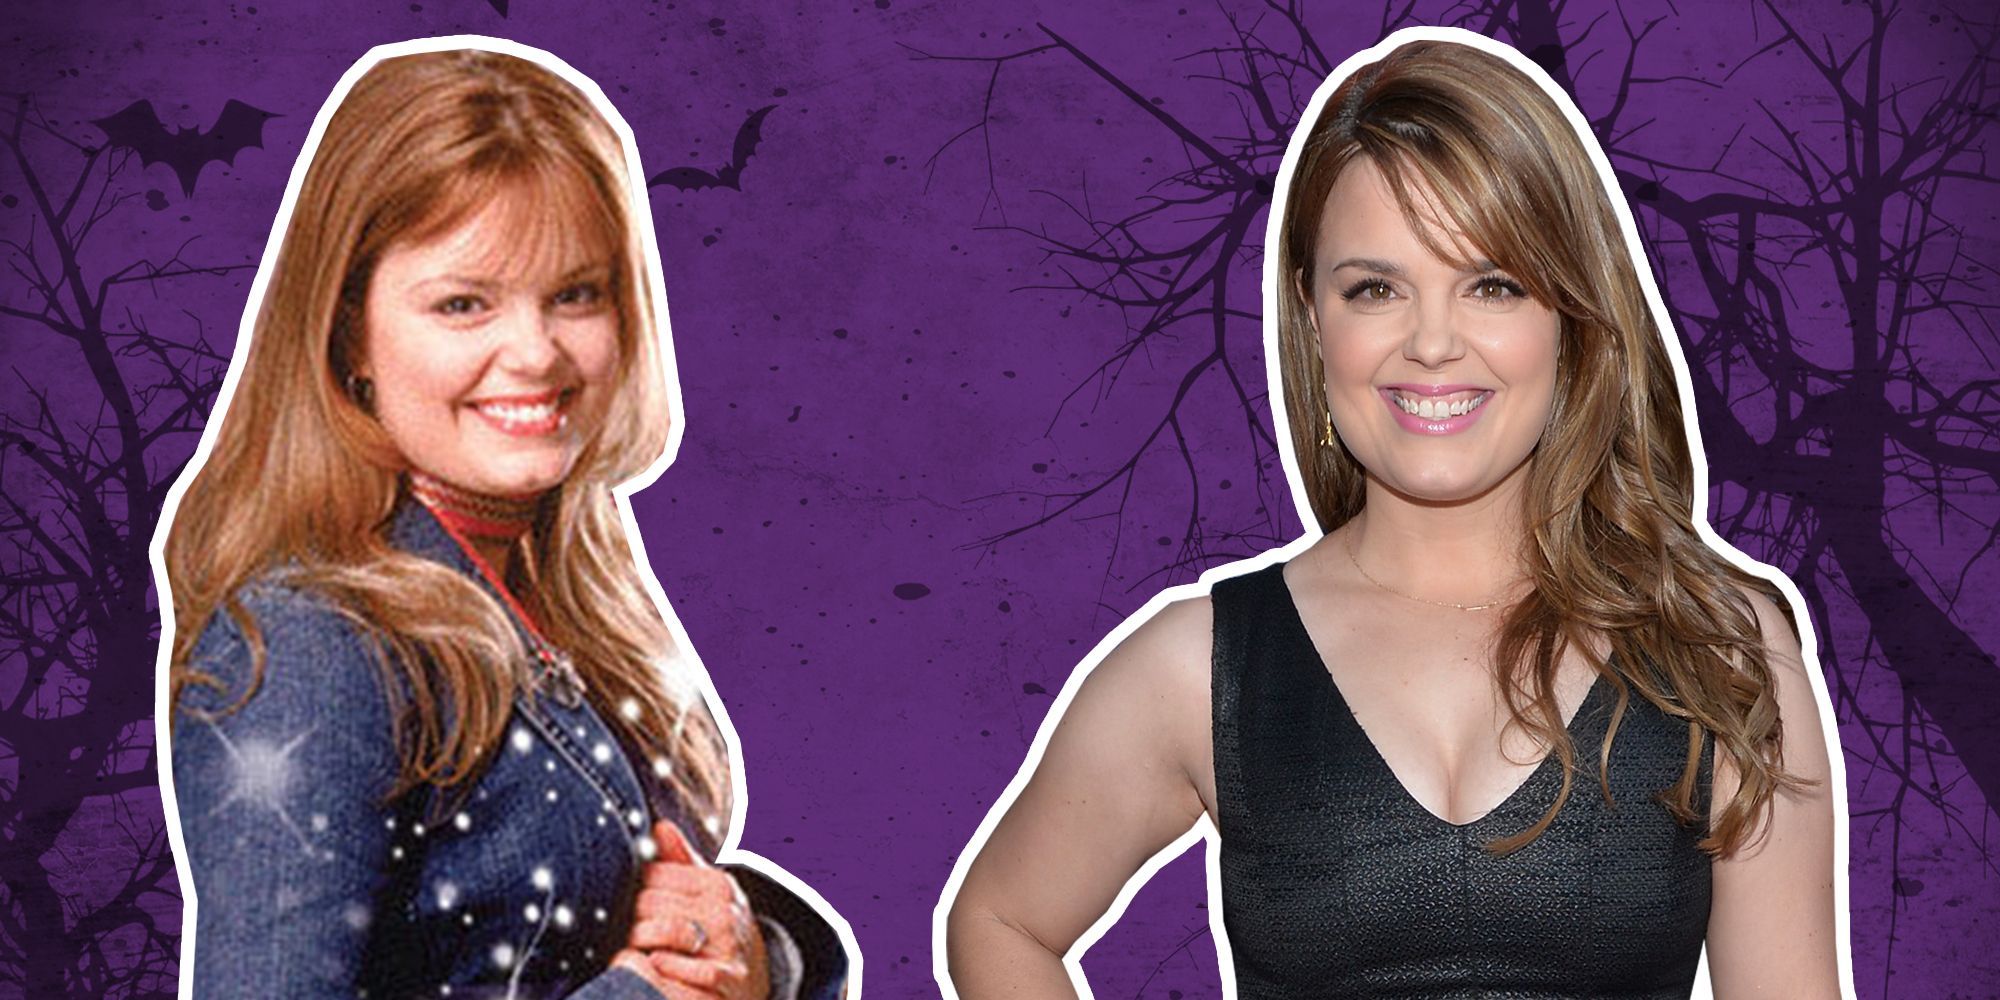 Halloweentown's Kimberly J. Brown, as a child and as an adult.